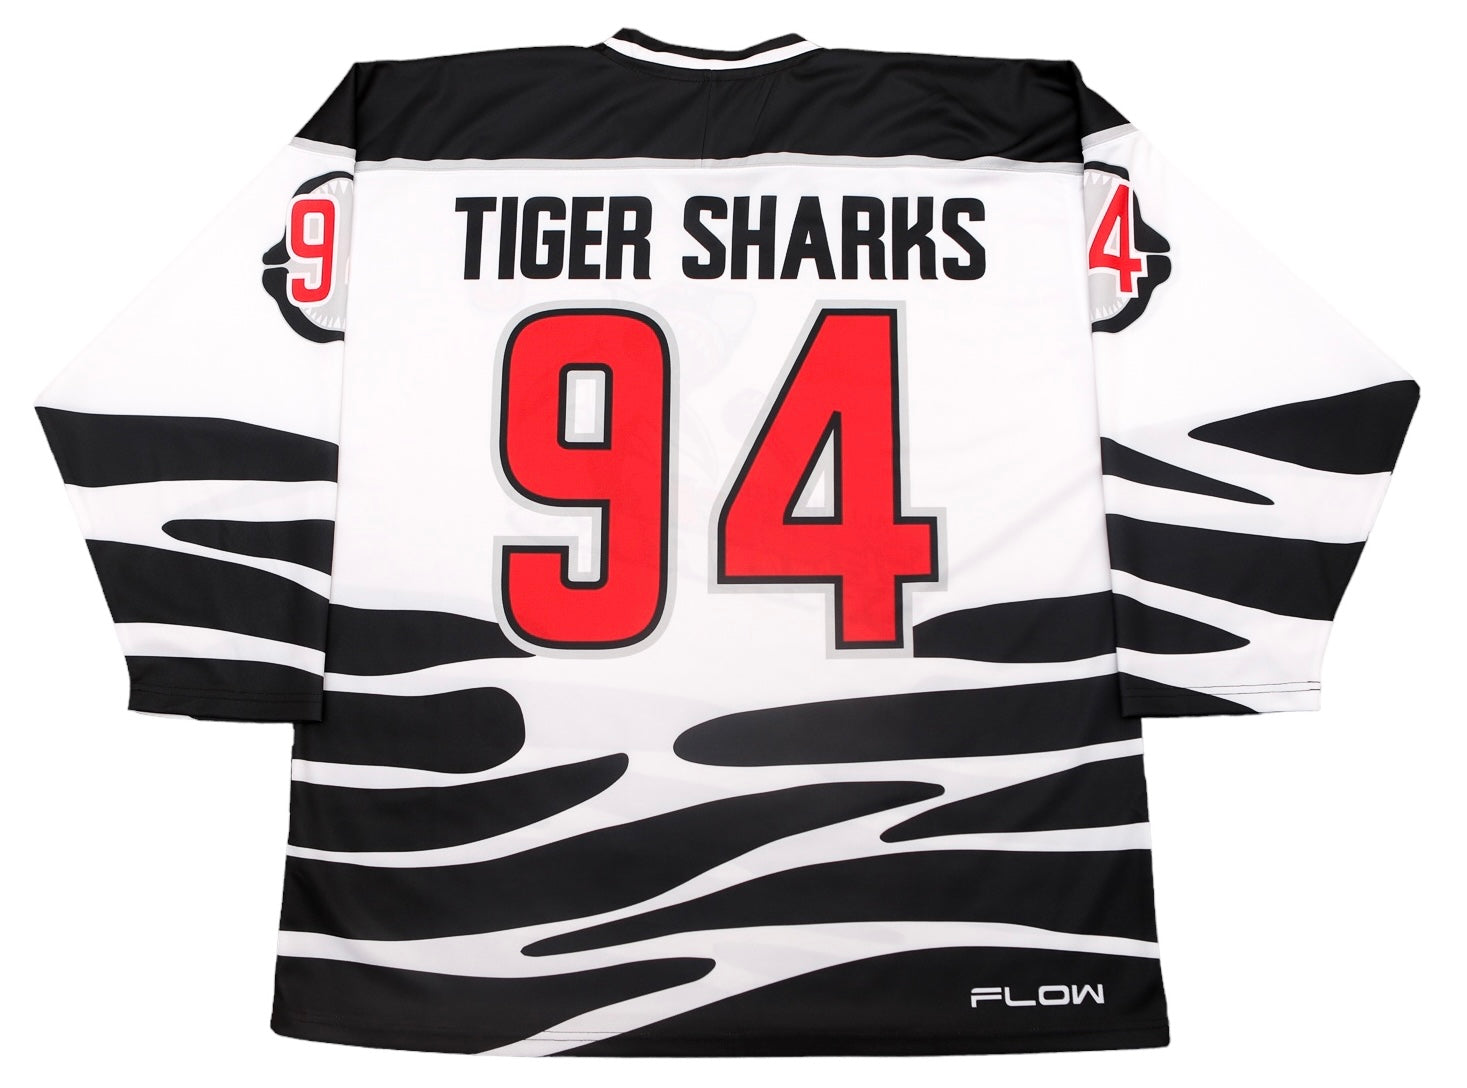 Tallahassee Tiger Sharks™ White Jersey (CUSTOM - PRE ORDER)